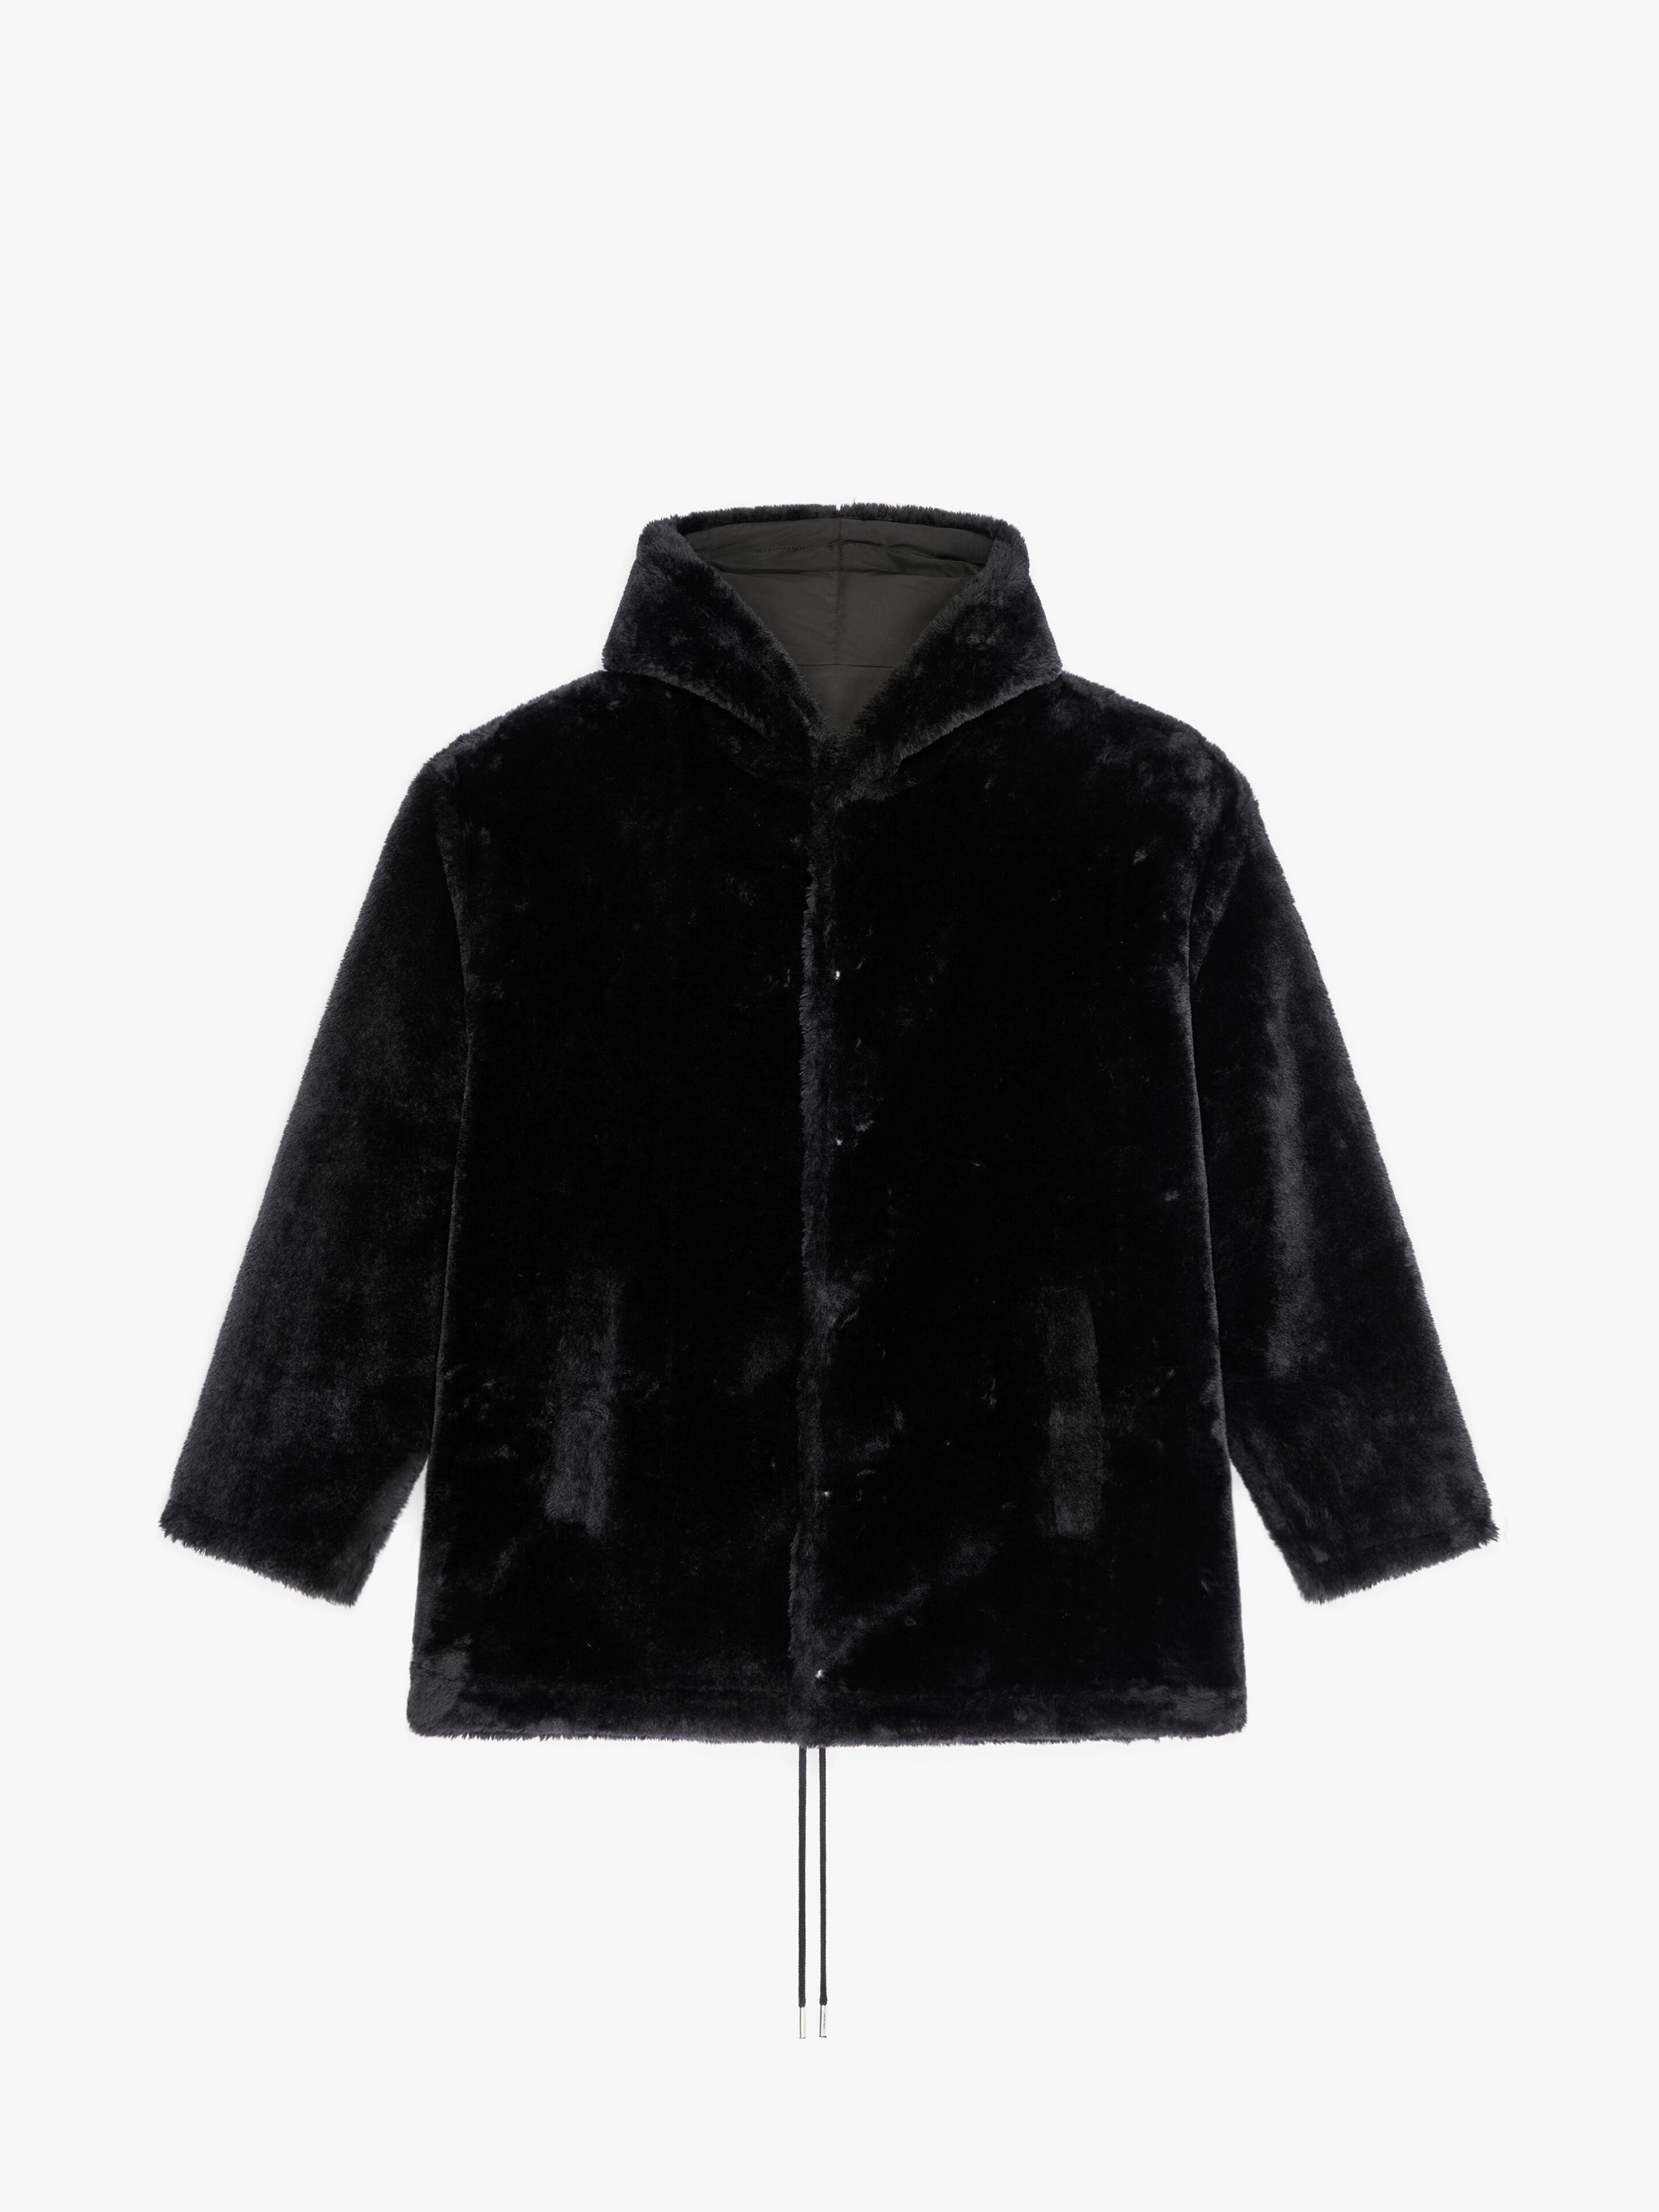 REVERSIBLE PARKA IN NYLON AND FAUX FUR - 7